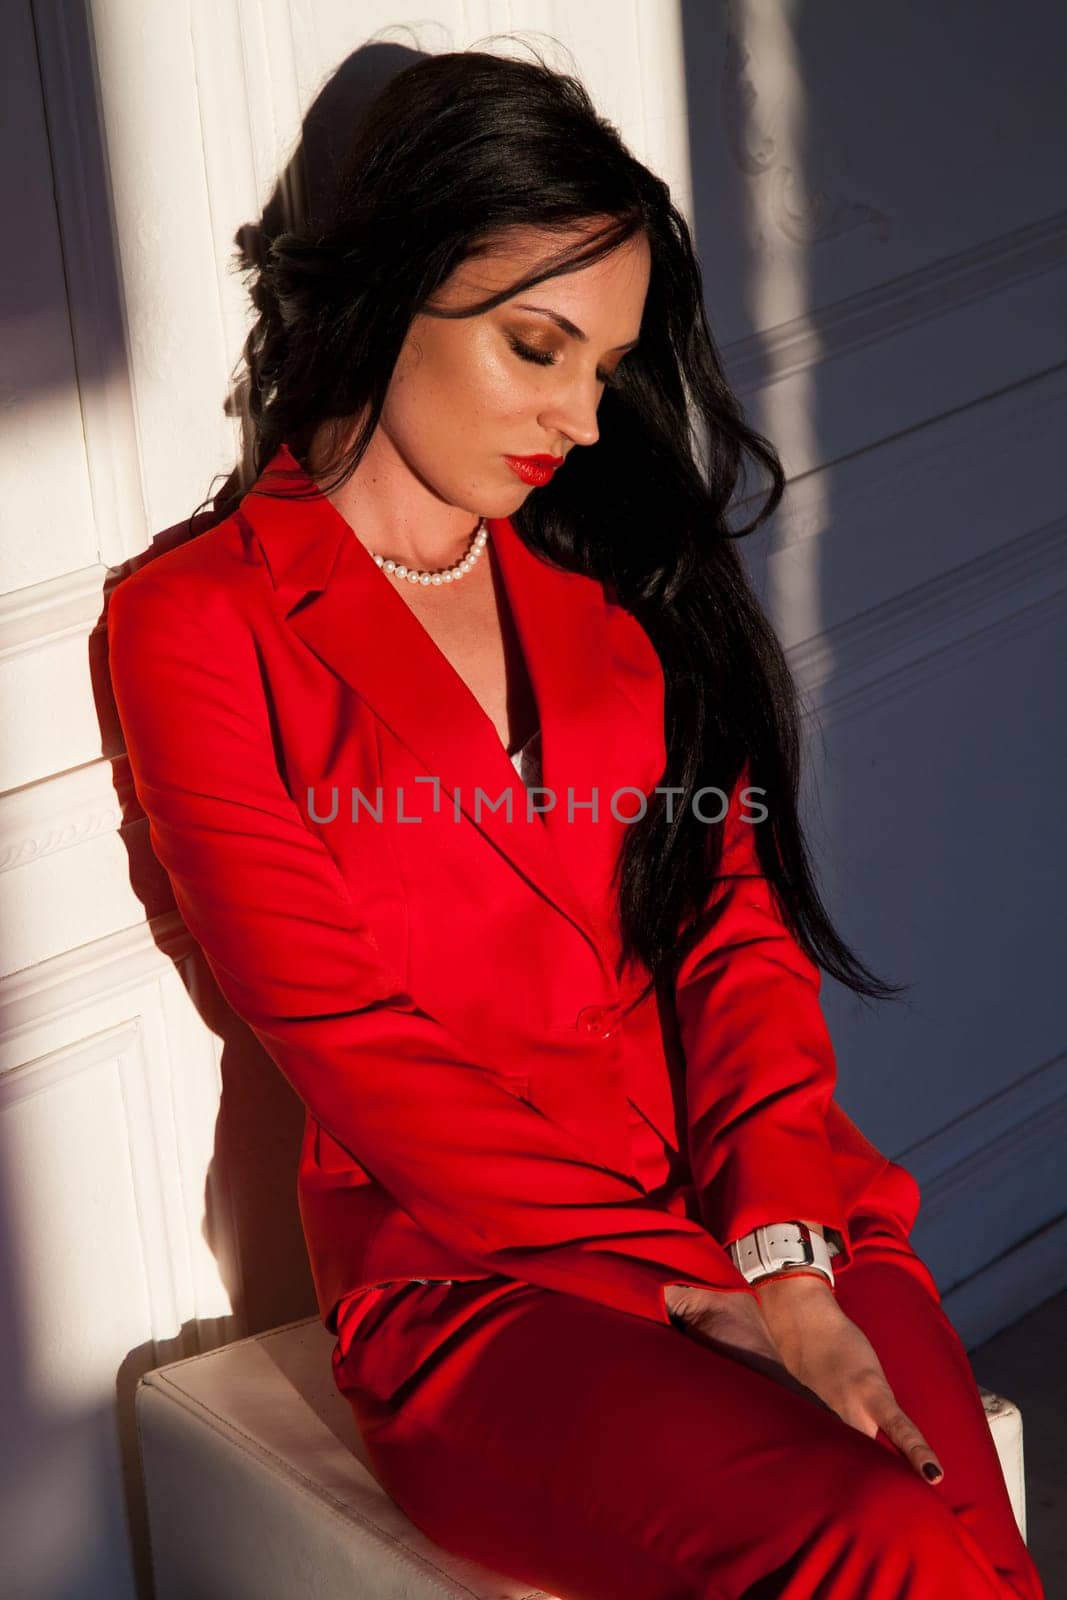 portrait of a beautiful woman in a red business suit in the office by Simakov